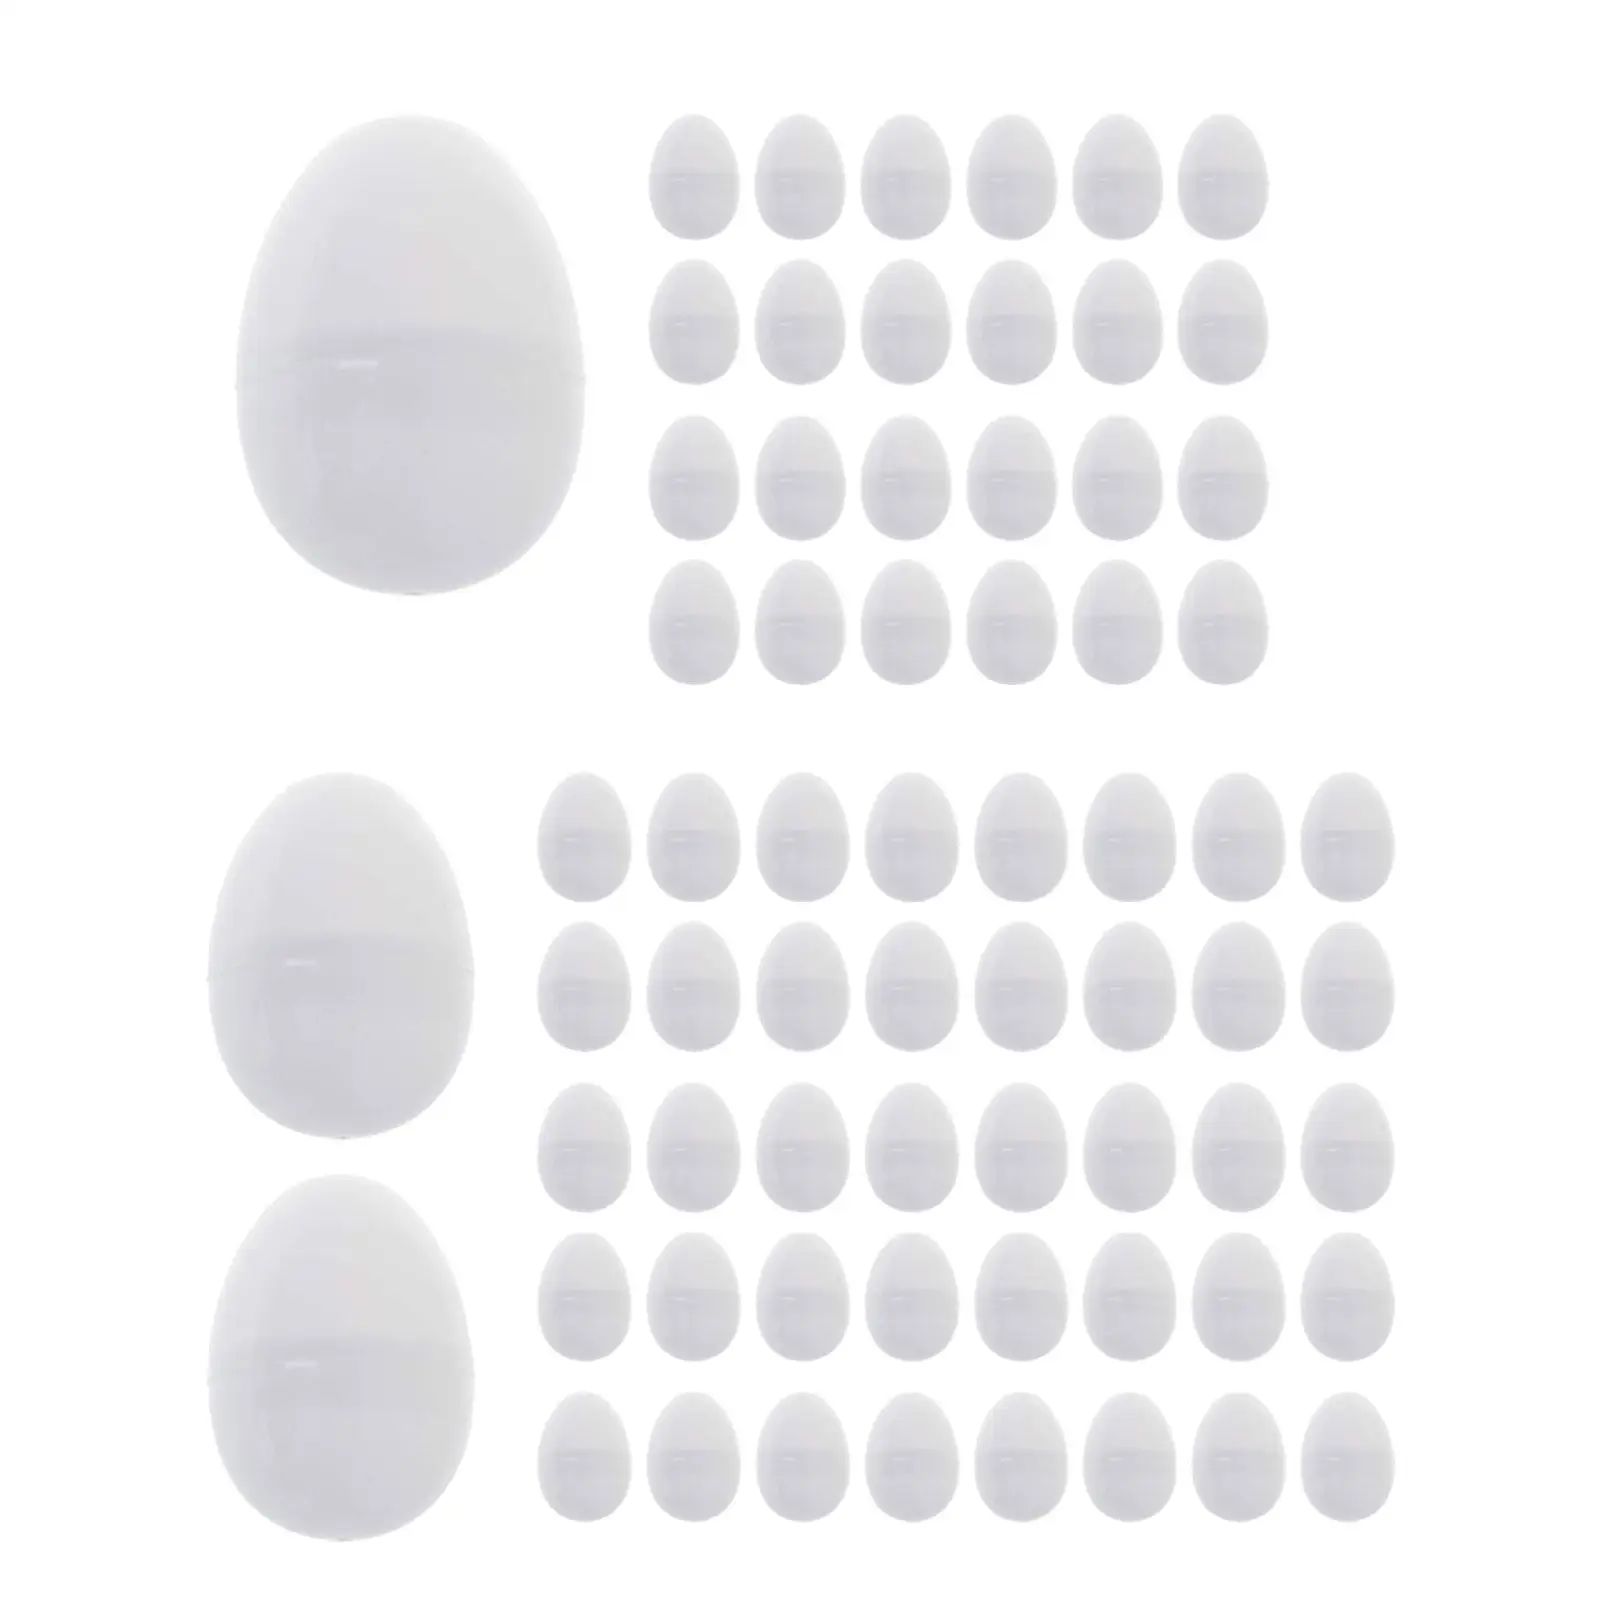 

White Easter Eggs Fillable Easter Eggs Art Unpainted Surprise and Fun Easter Decor DIY Painting Eggs for Holidays Presents